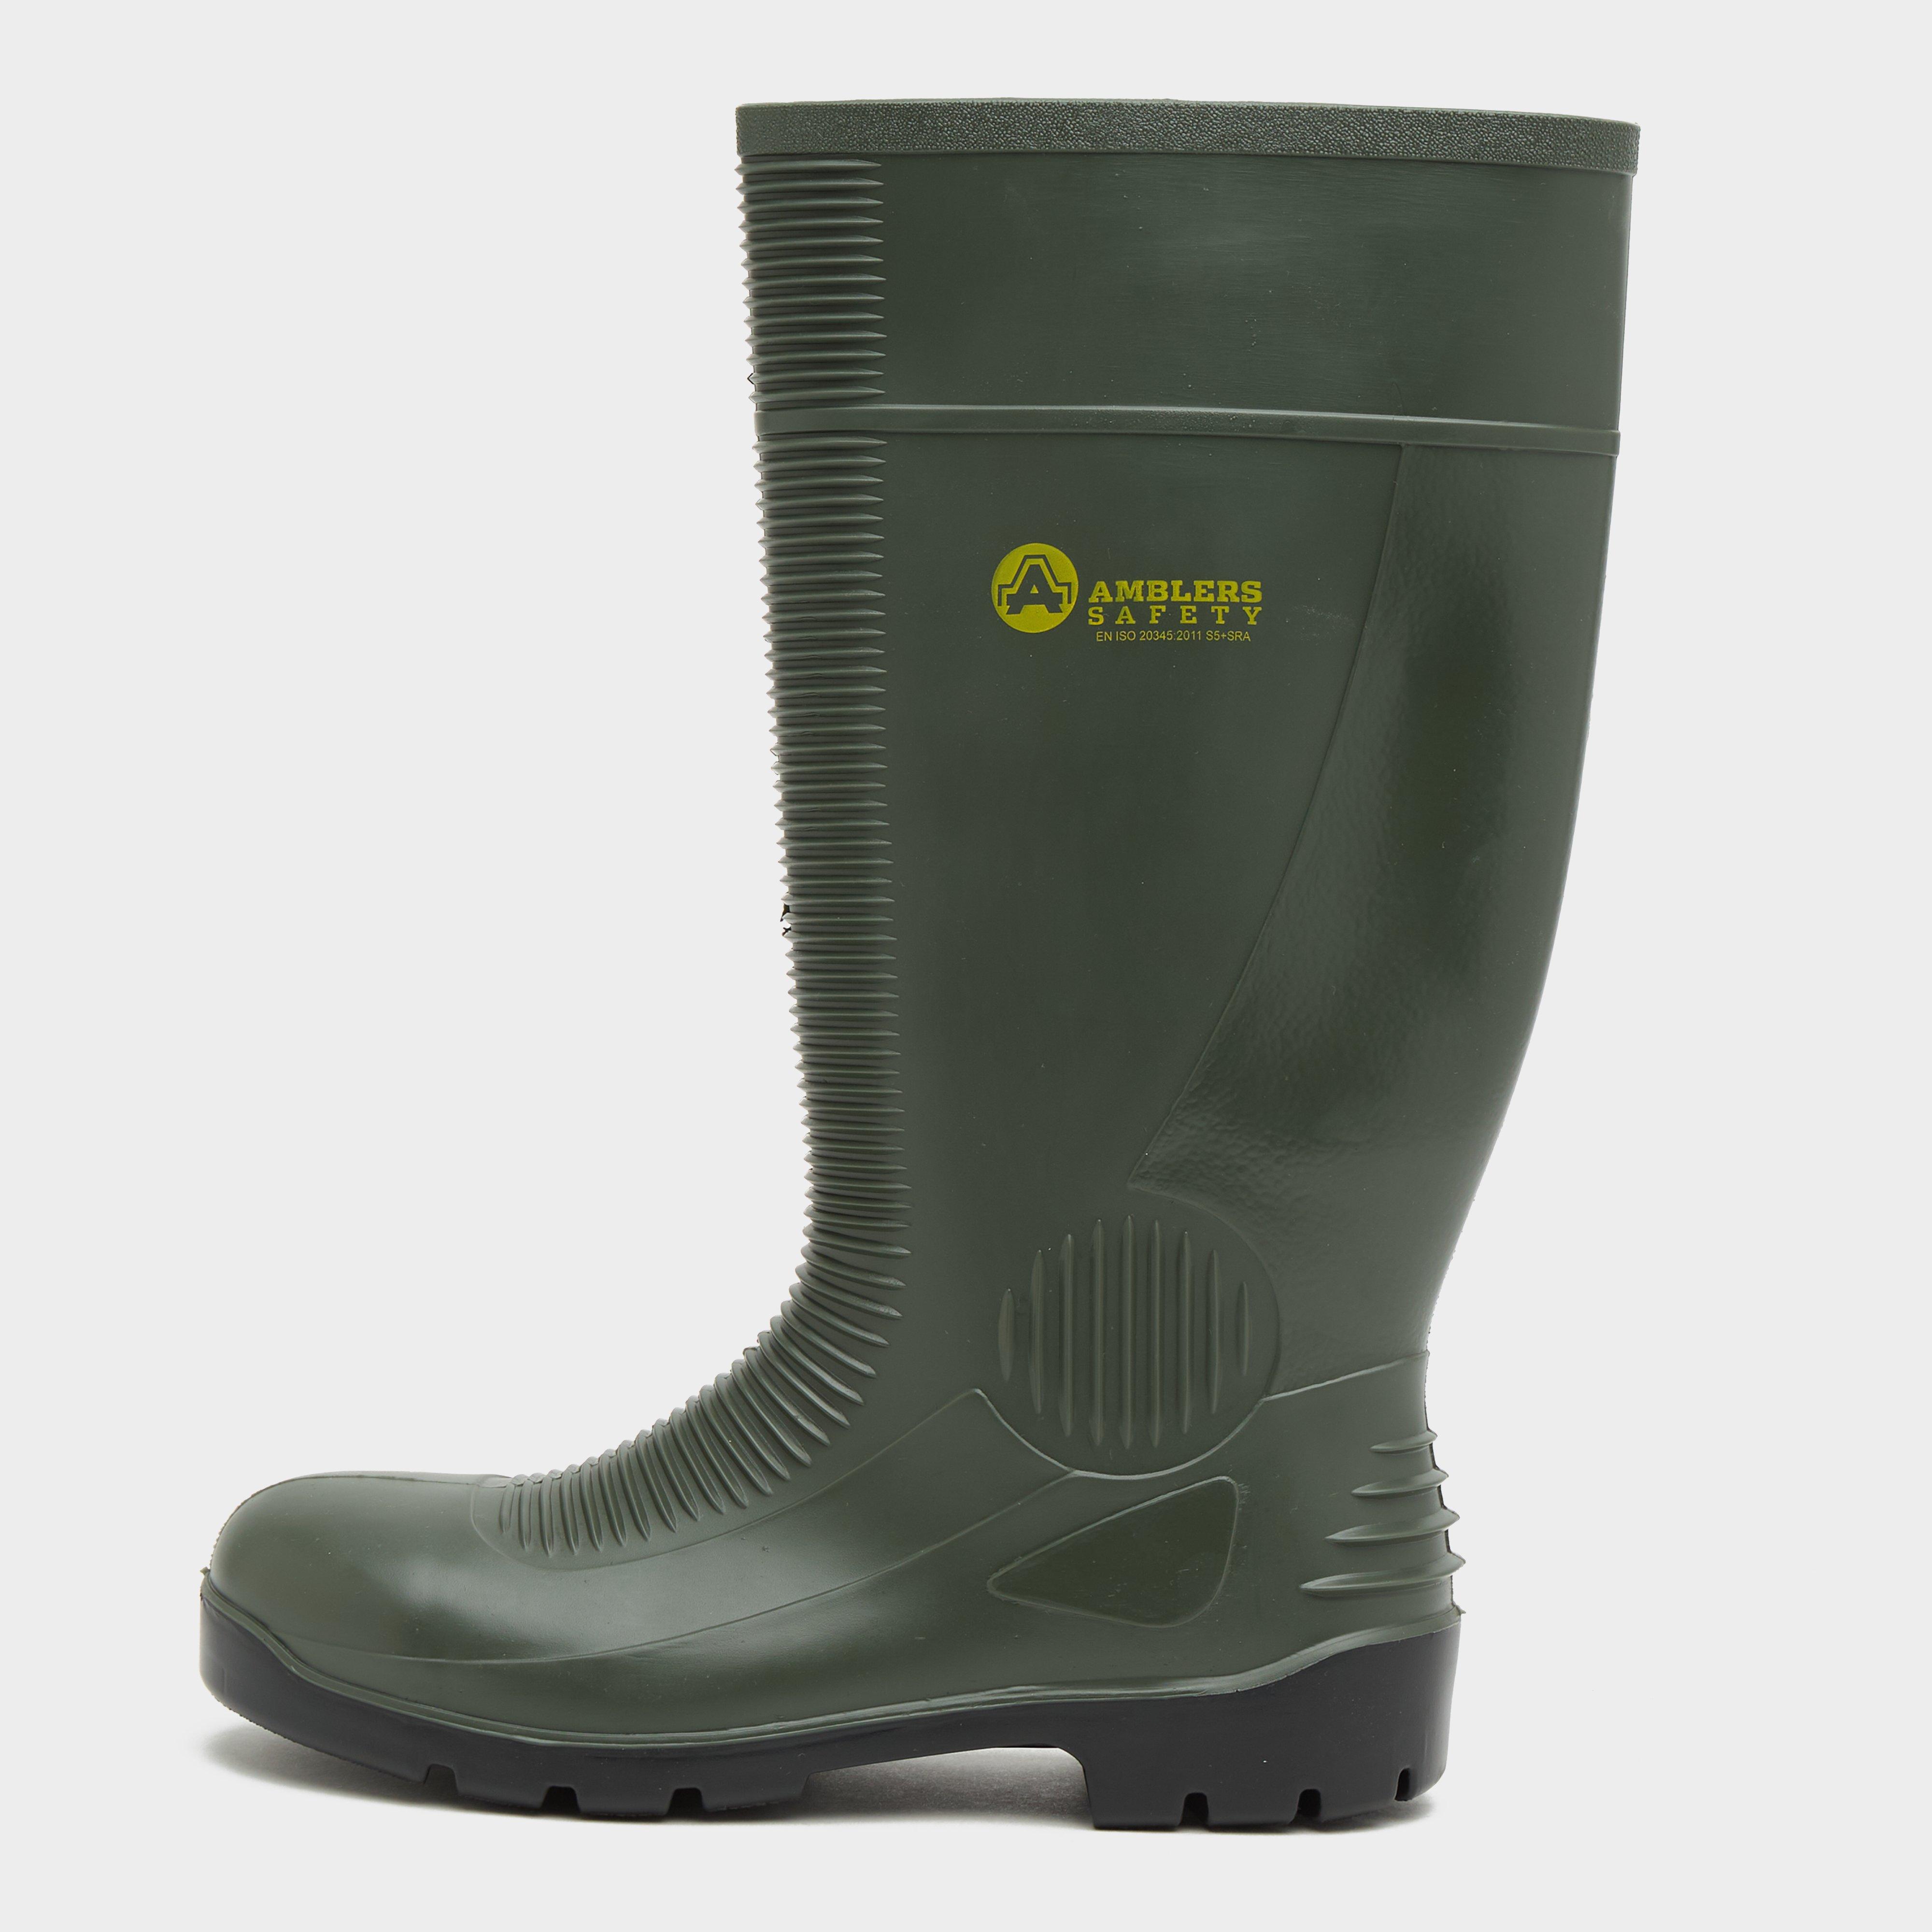 Photos - Trekking Shoes Safety 1st Amblers safety FS99 Safety Wellington Boots 